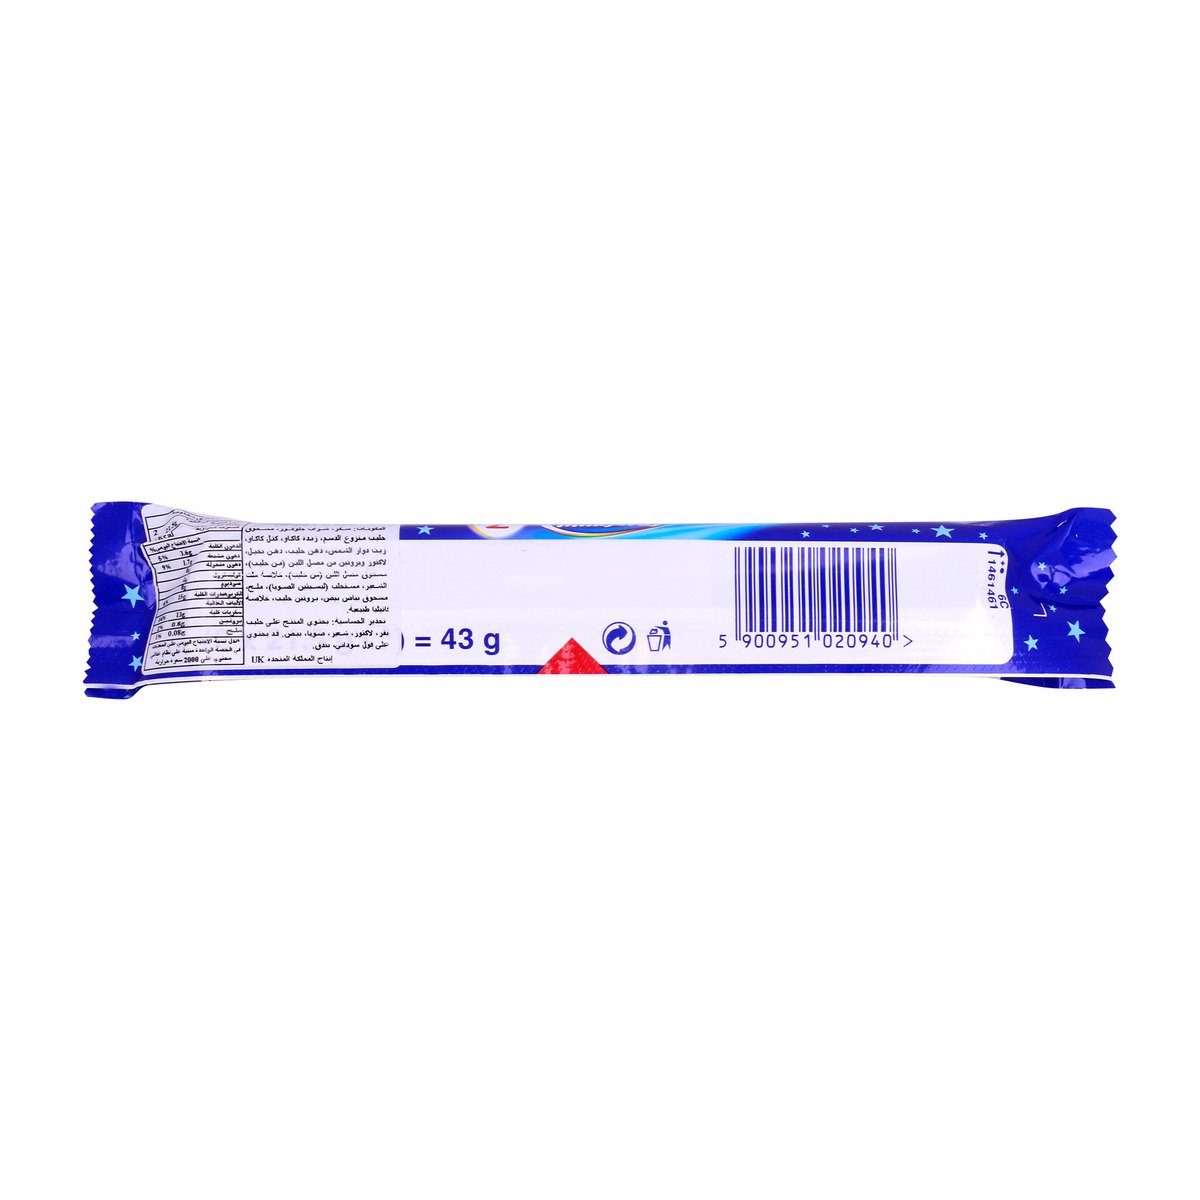 Milkyway Twin Pack Chocolate 43 g